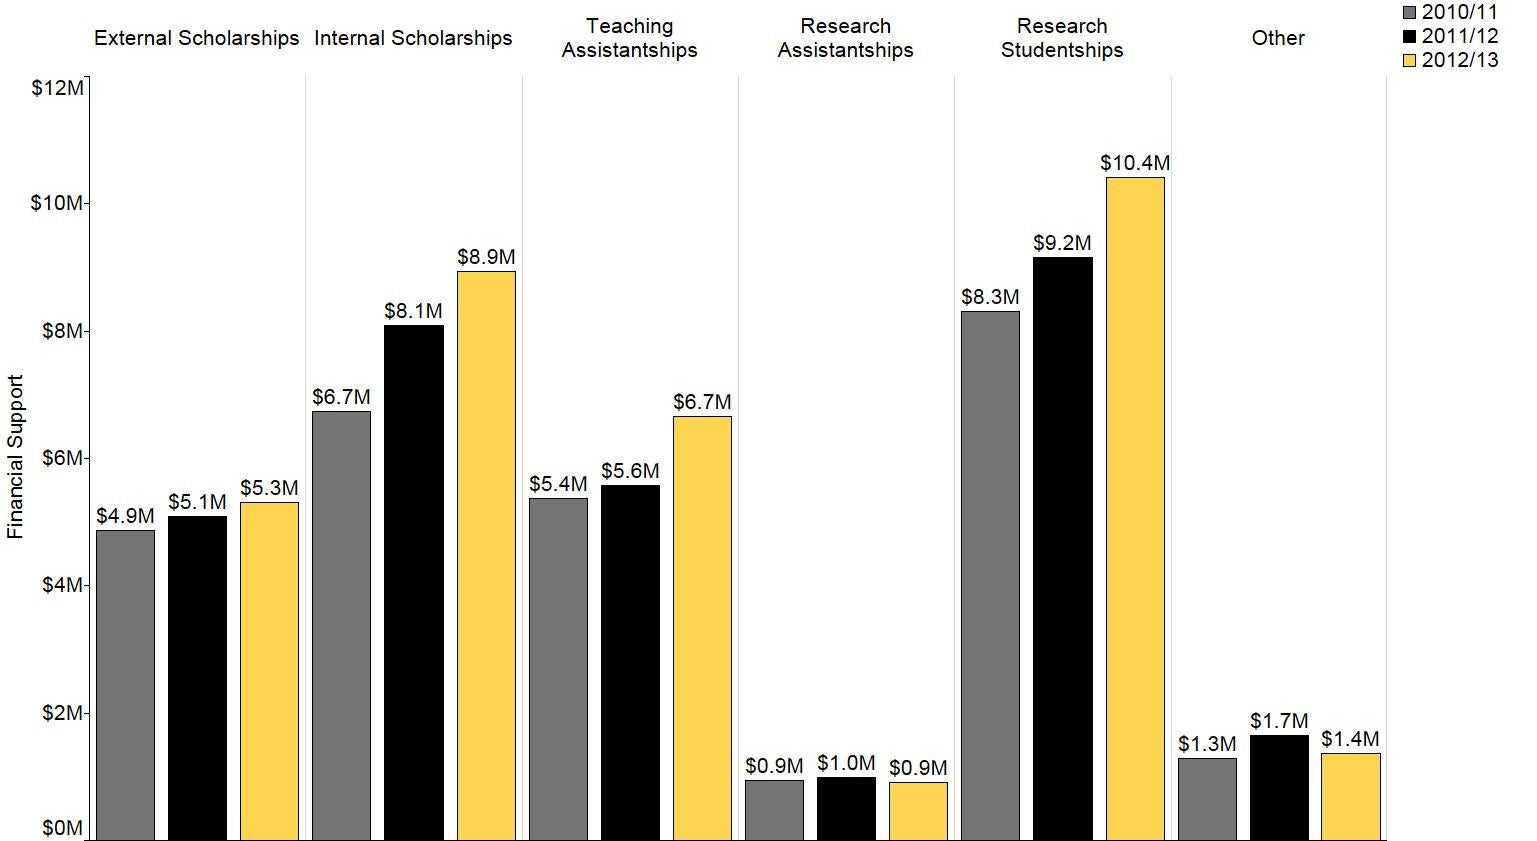 This figure shows the dollar amount of financial support to Master's students by type and betwen 2010 and 2013. Support has increased in nearly all categories since 2010/11.  Data for this figure are in the Data Table section.